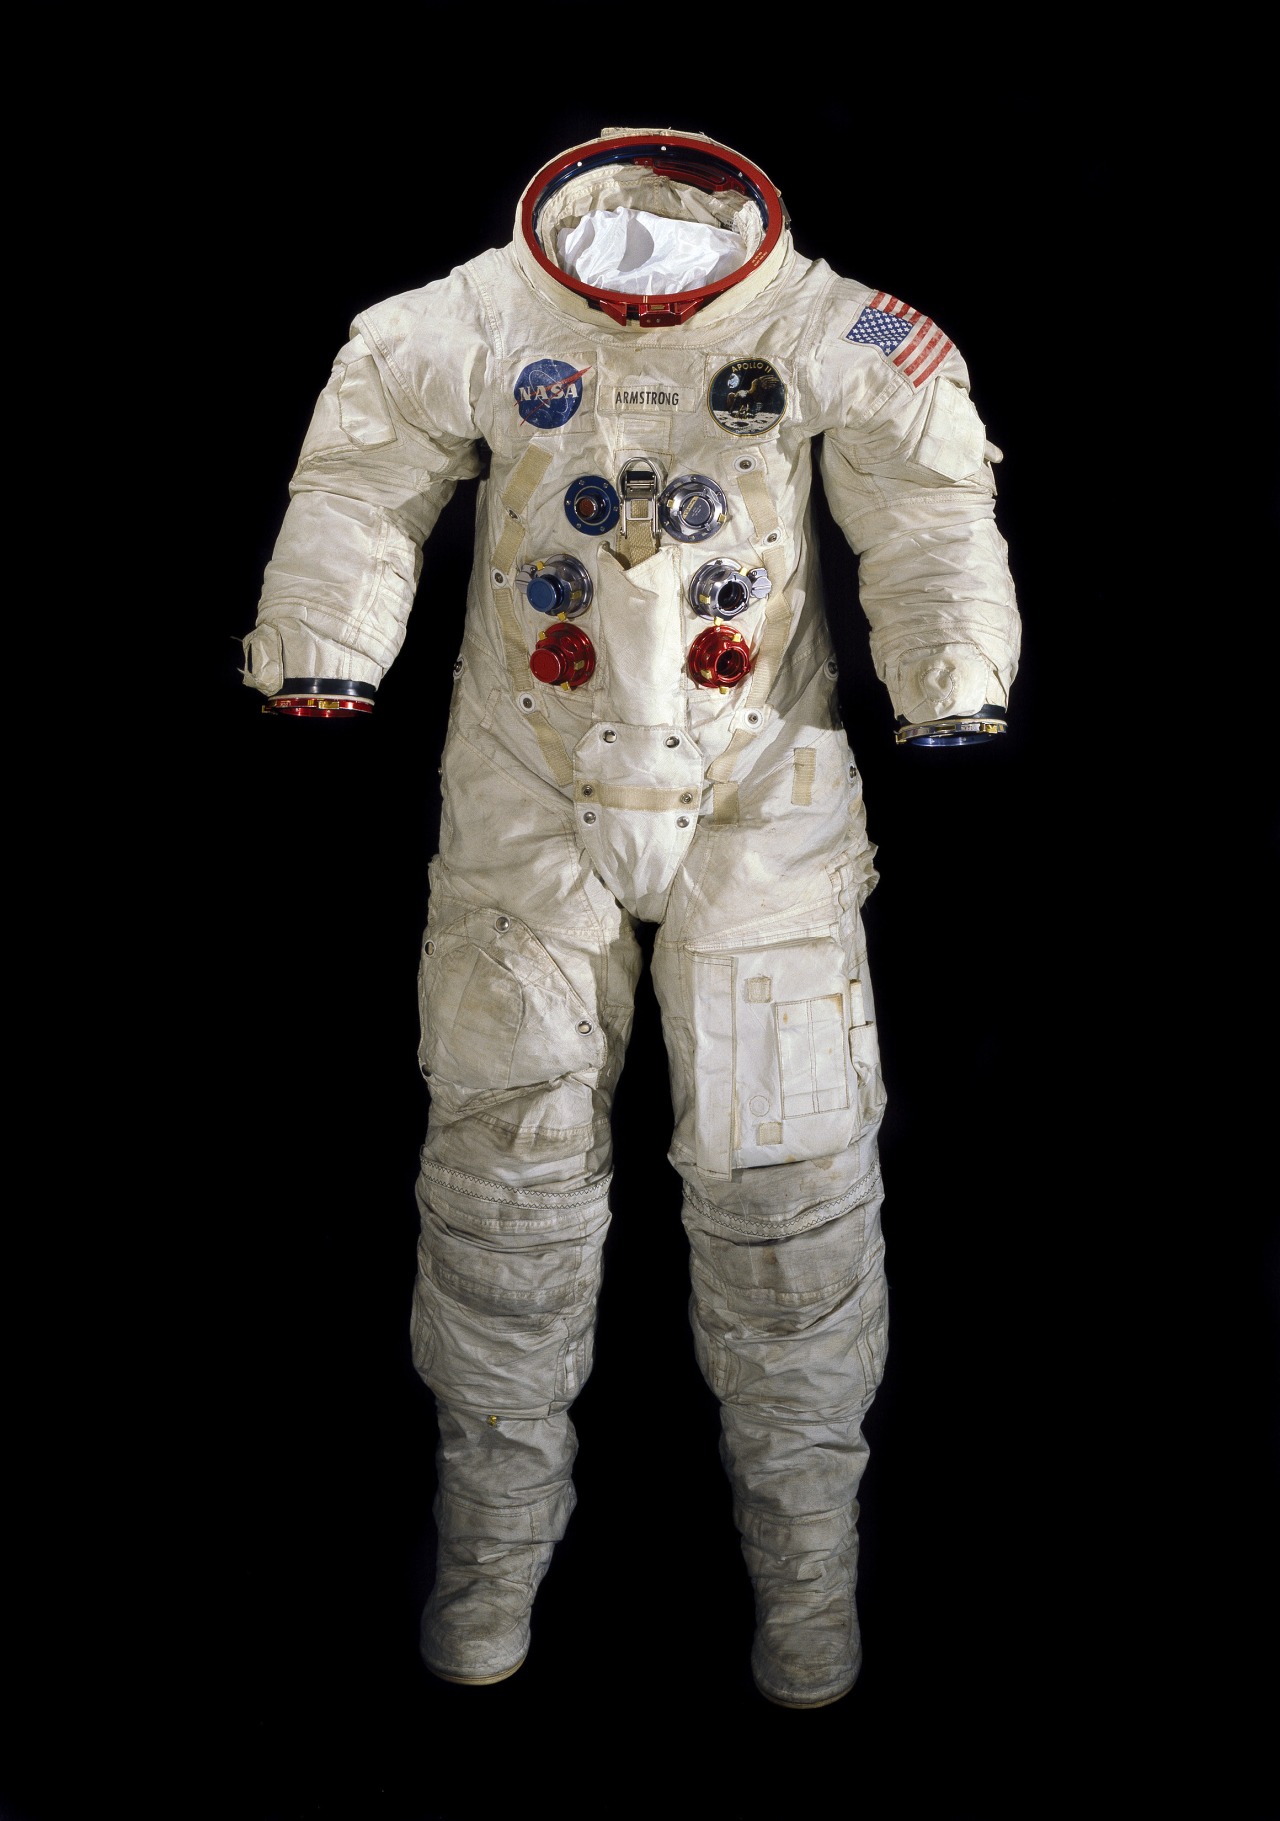 Neil Armstrong’s spacesuit worn on the Apollo 11 mission, which landed the first man on the moon on July 20, 1969